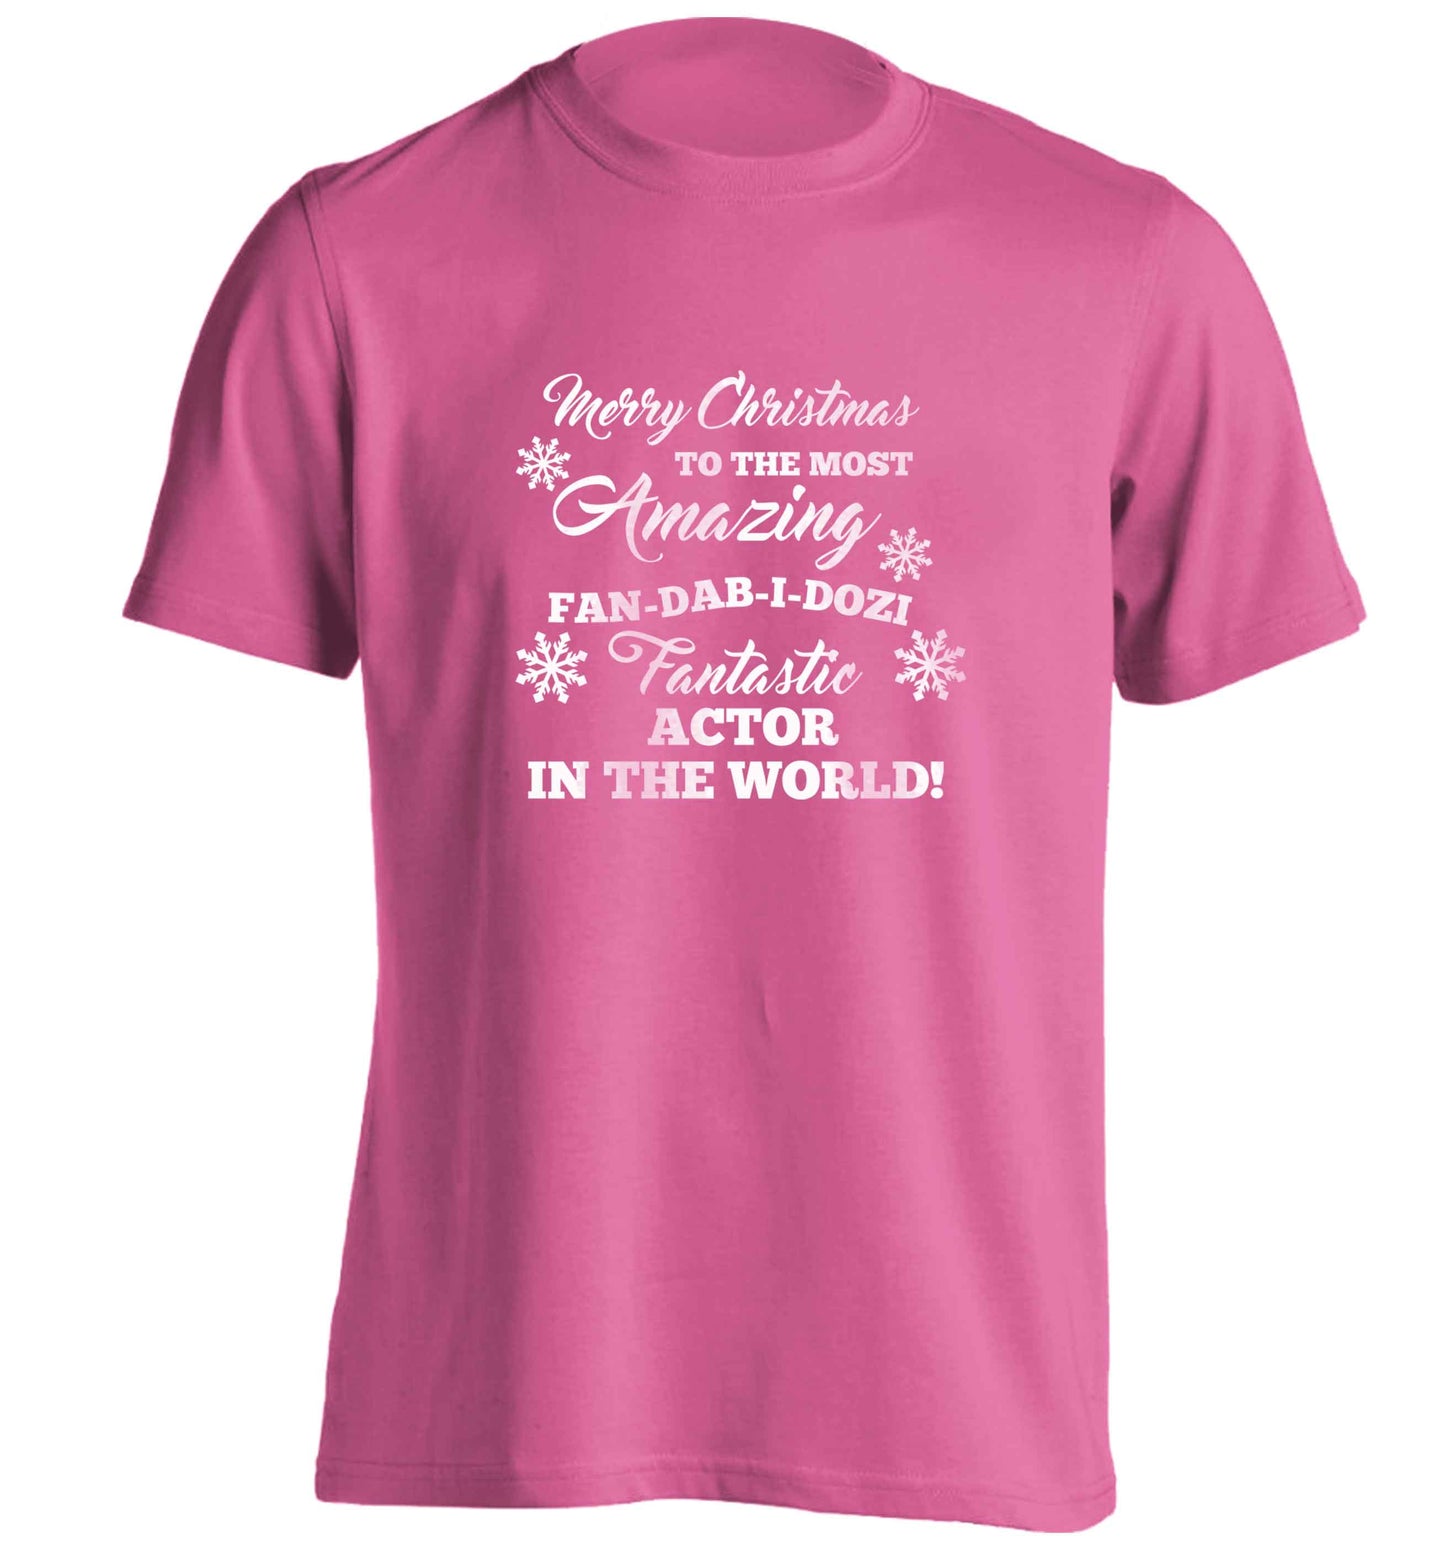 Merry Christmas to the most amazing actor in the world! adults unisex pink Tshirt 2XL